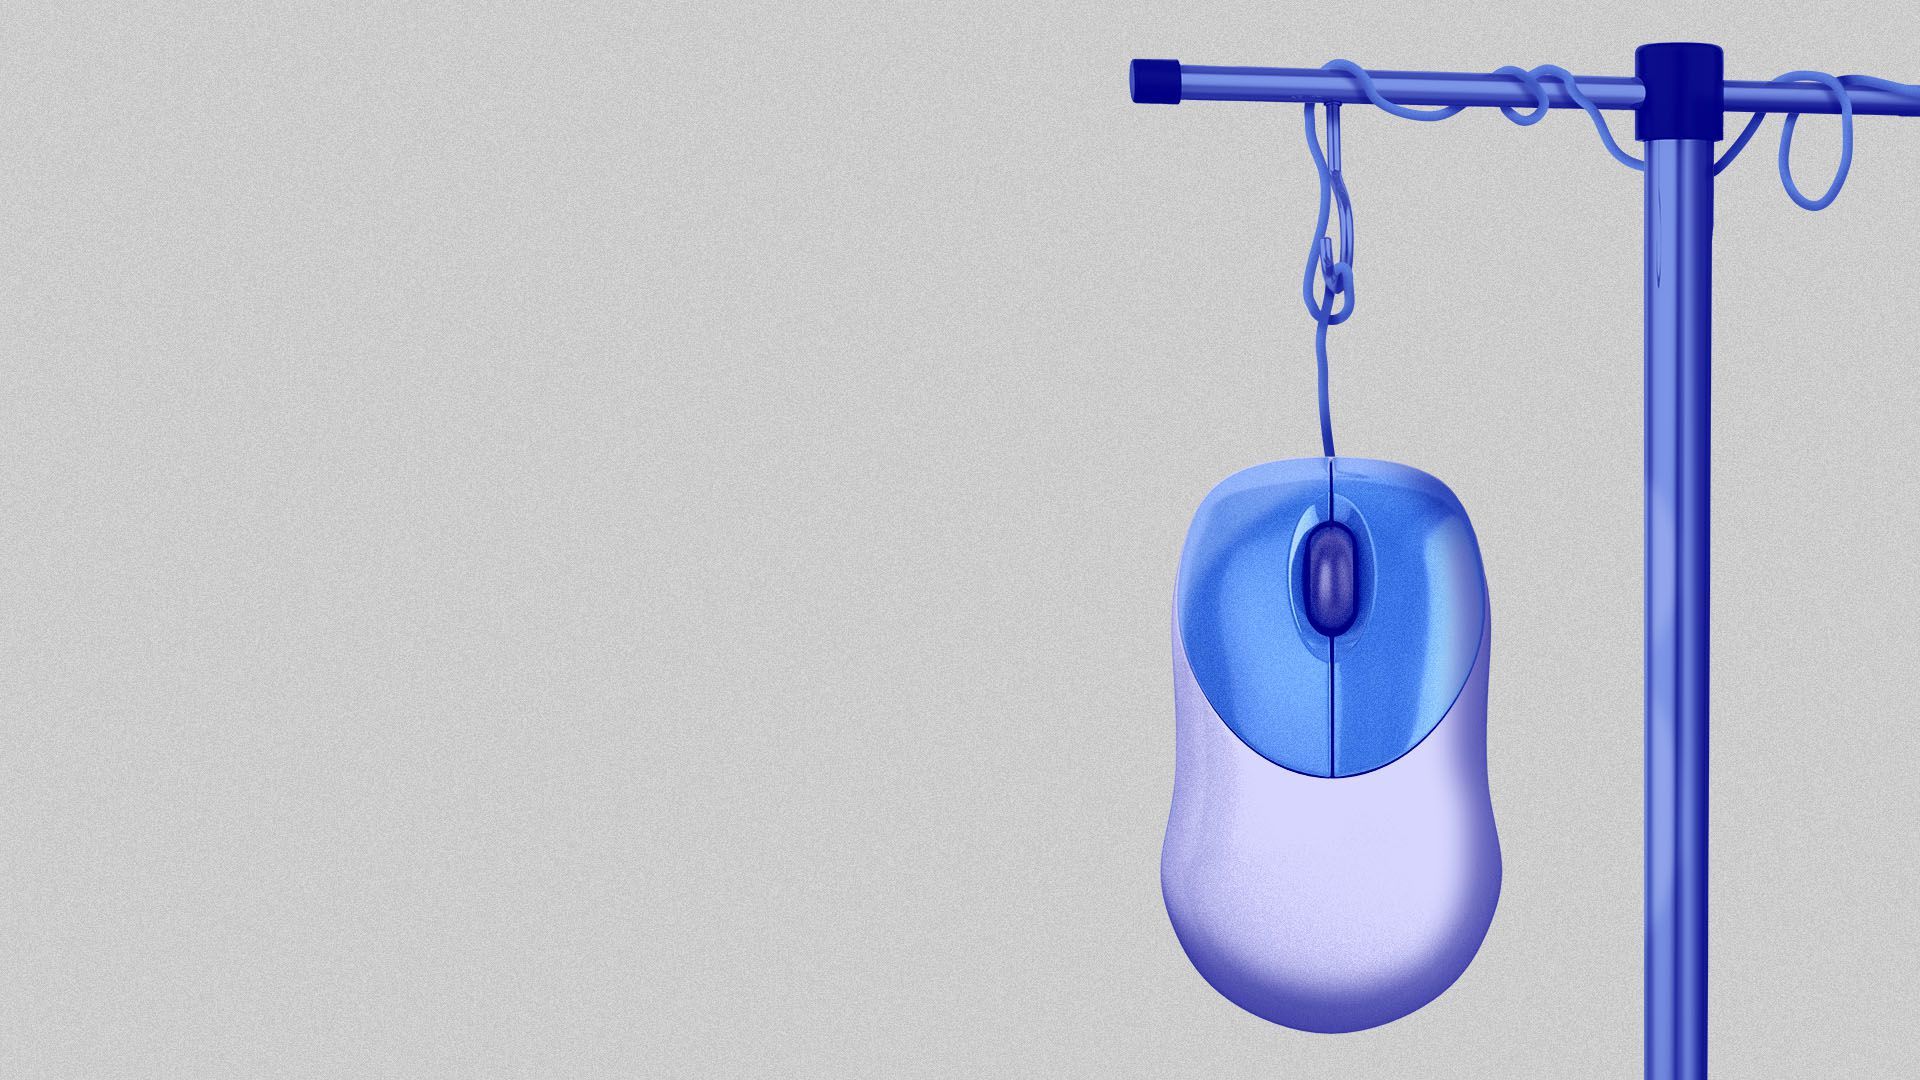 Illustration of a computer mouse hanging like an i.v. drip